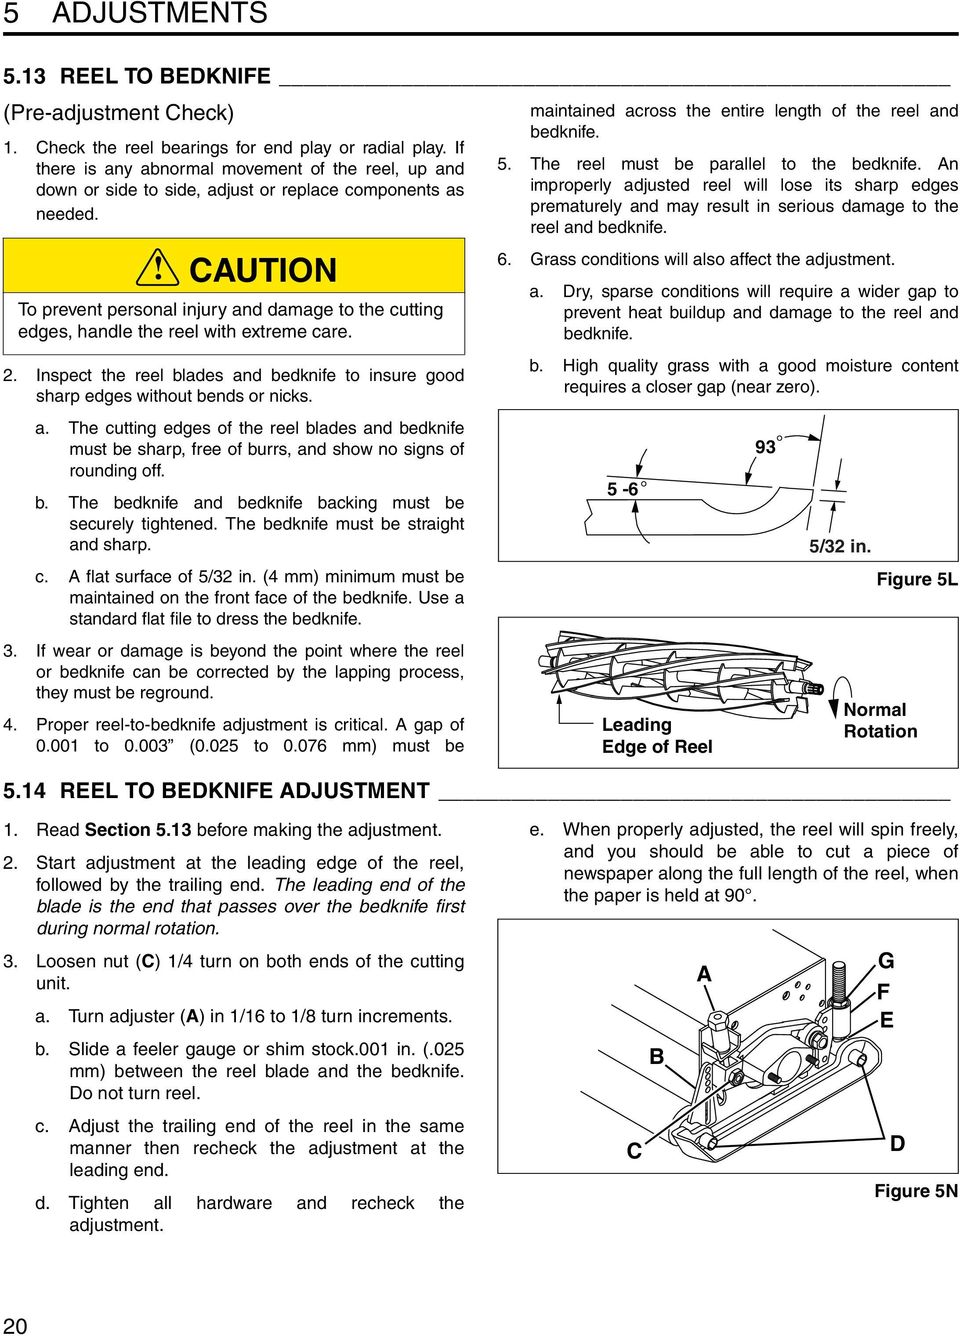 CAUTION To prevent personal injury and damage to the cutting edges, handle the reel with extreme care. 2. Inspect the reel blades and bedknife to insure good sharp edges without bends or nicks. a. The cutting edges of the reel blades and bedknife must be sharp, free of burrs, and show no signs of rounding off.